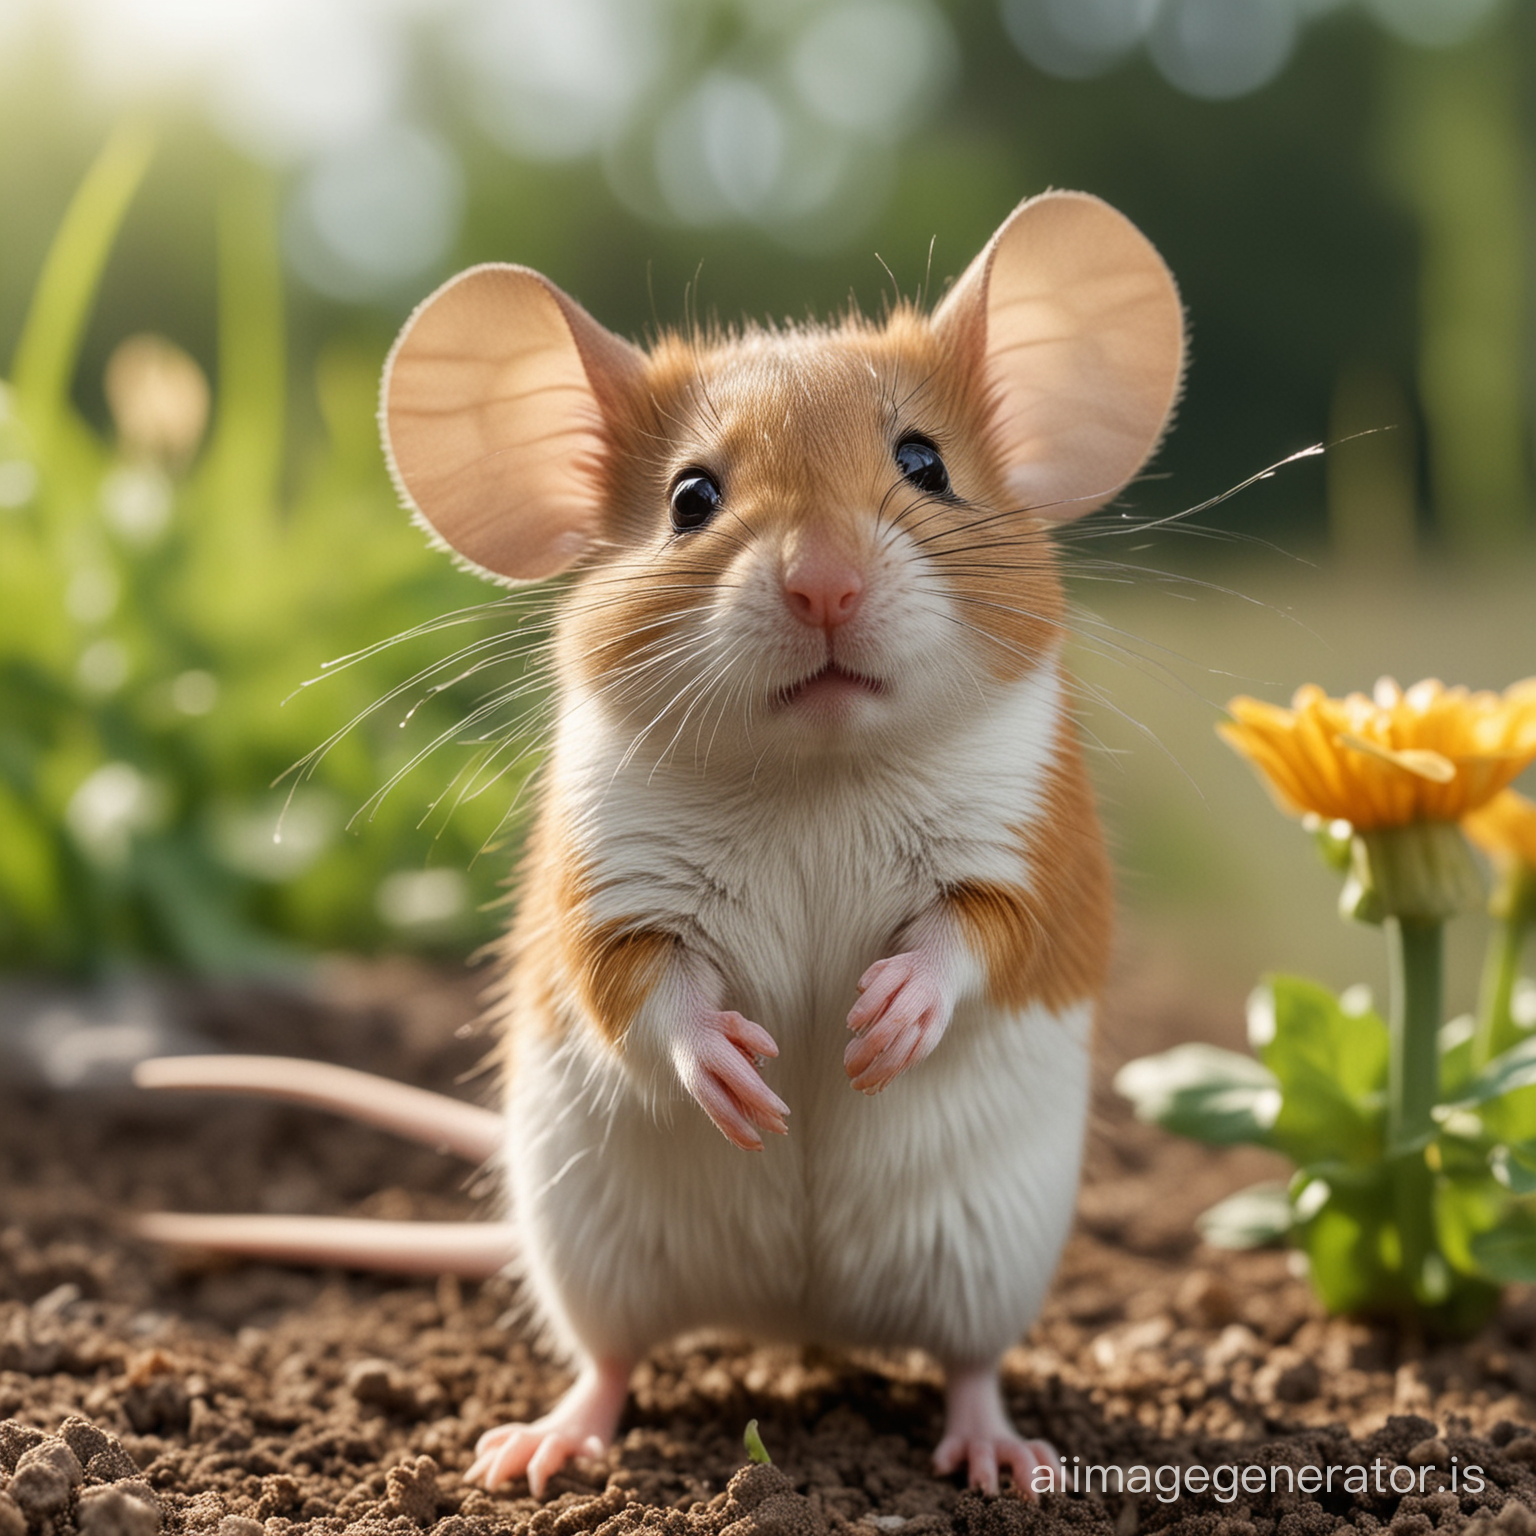 A very beautiful and cute mouse in the garden. Mouse pose is standing and smiling 